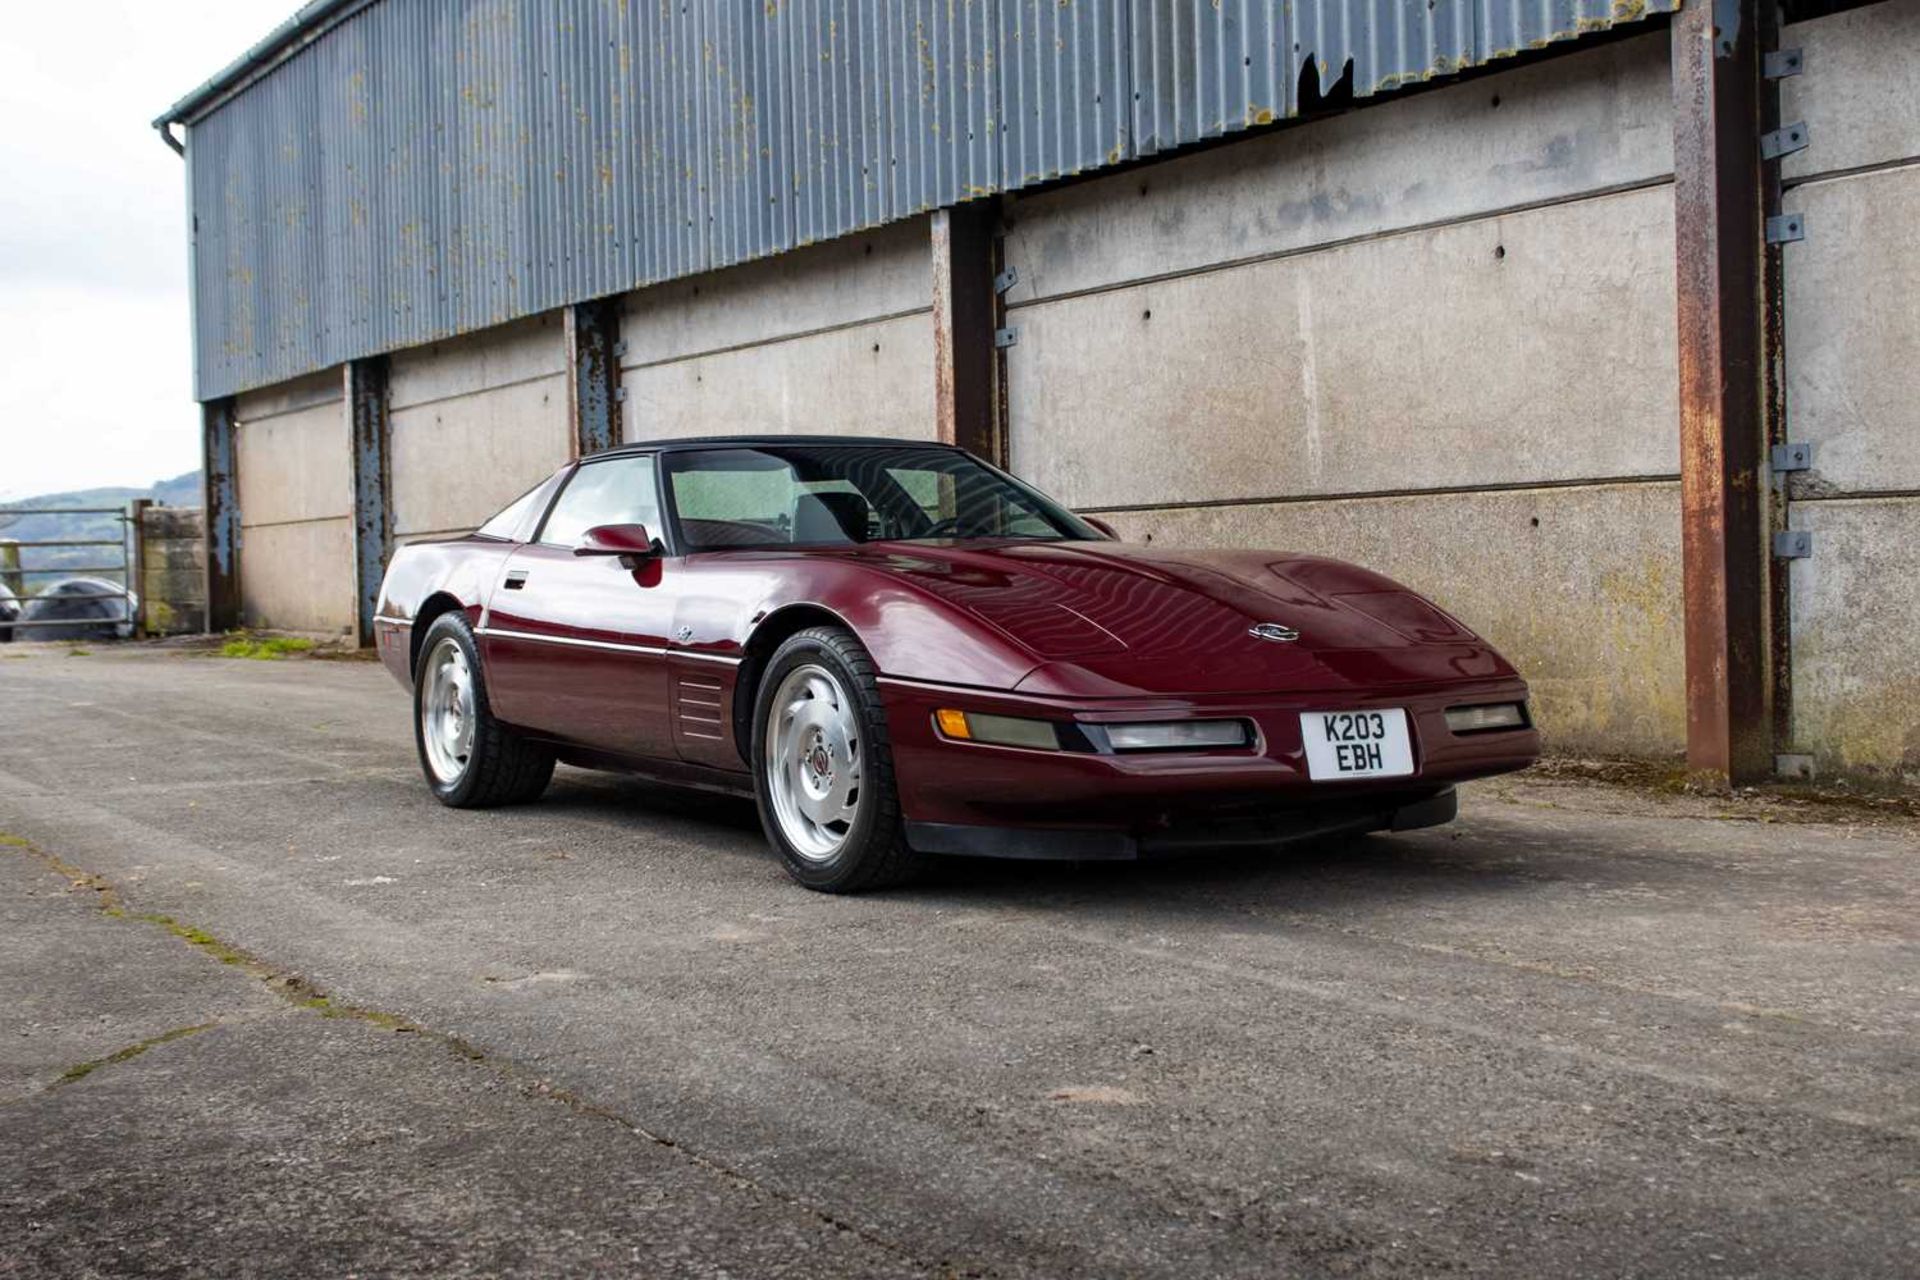 1993 Chevrolet Corvette C4  The highly sought-after 40th Anniversary Edition  - Image 3 of 78